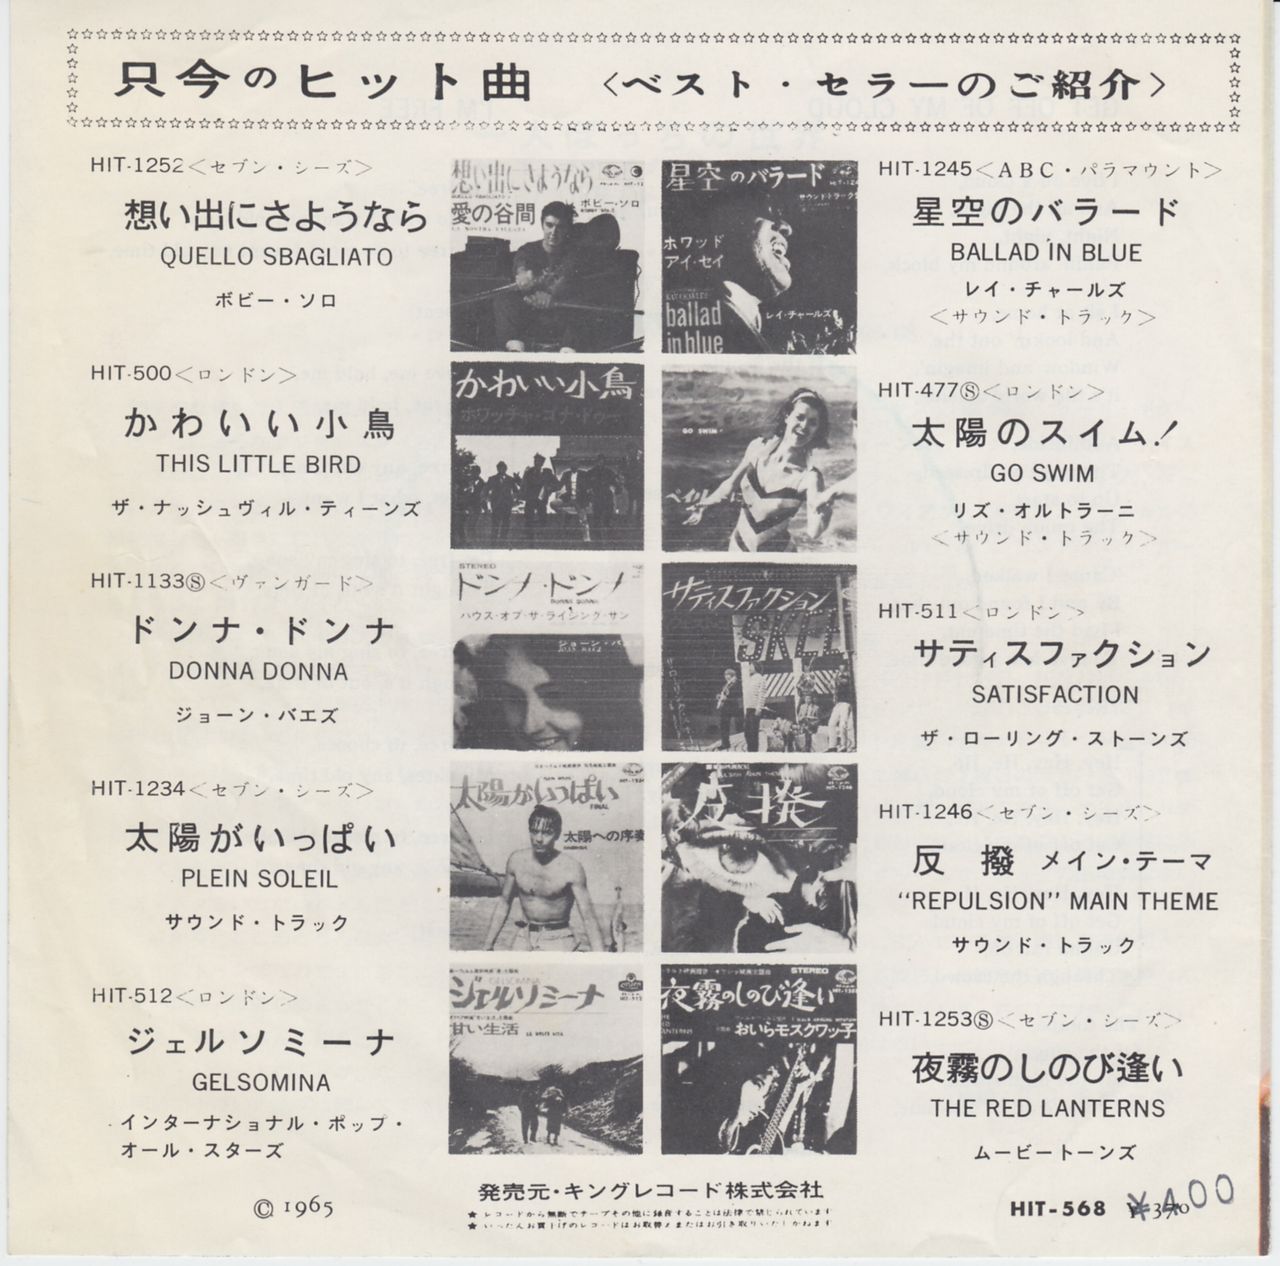 The Rolling Stones Get Off Of My Cloud - 1st ¥370 Japanese 7